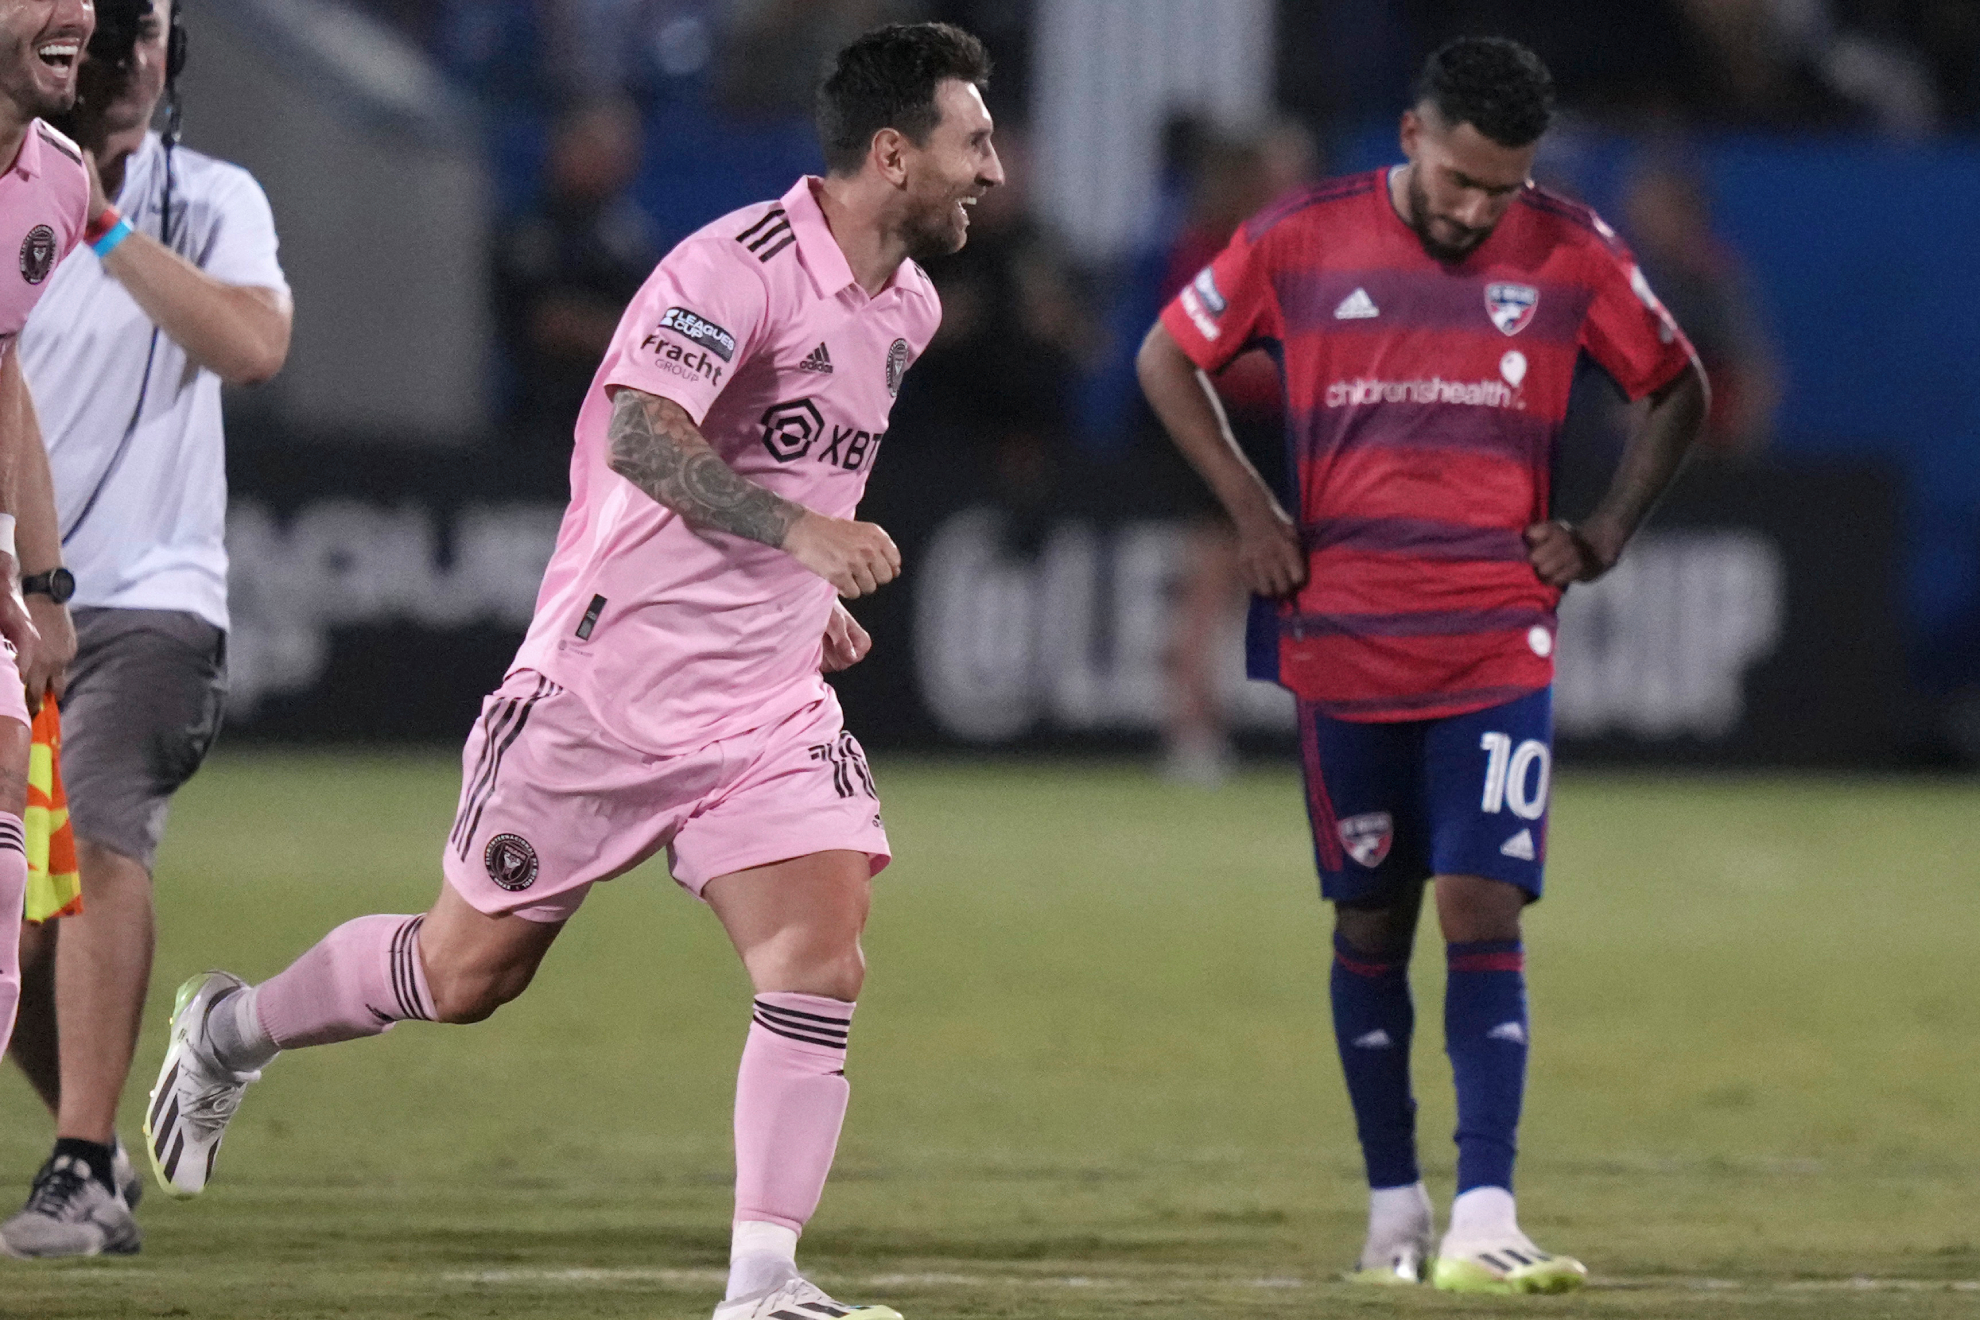 Messi is key again as Inter Miami reach the quarter-finals with a thrilling second half